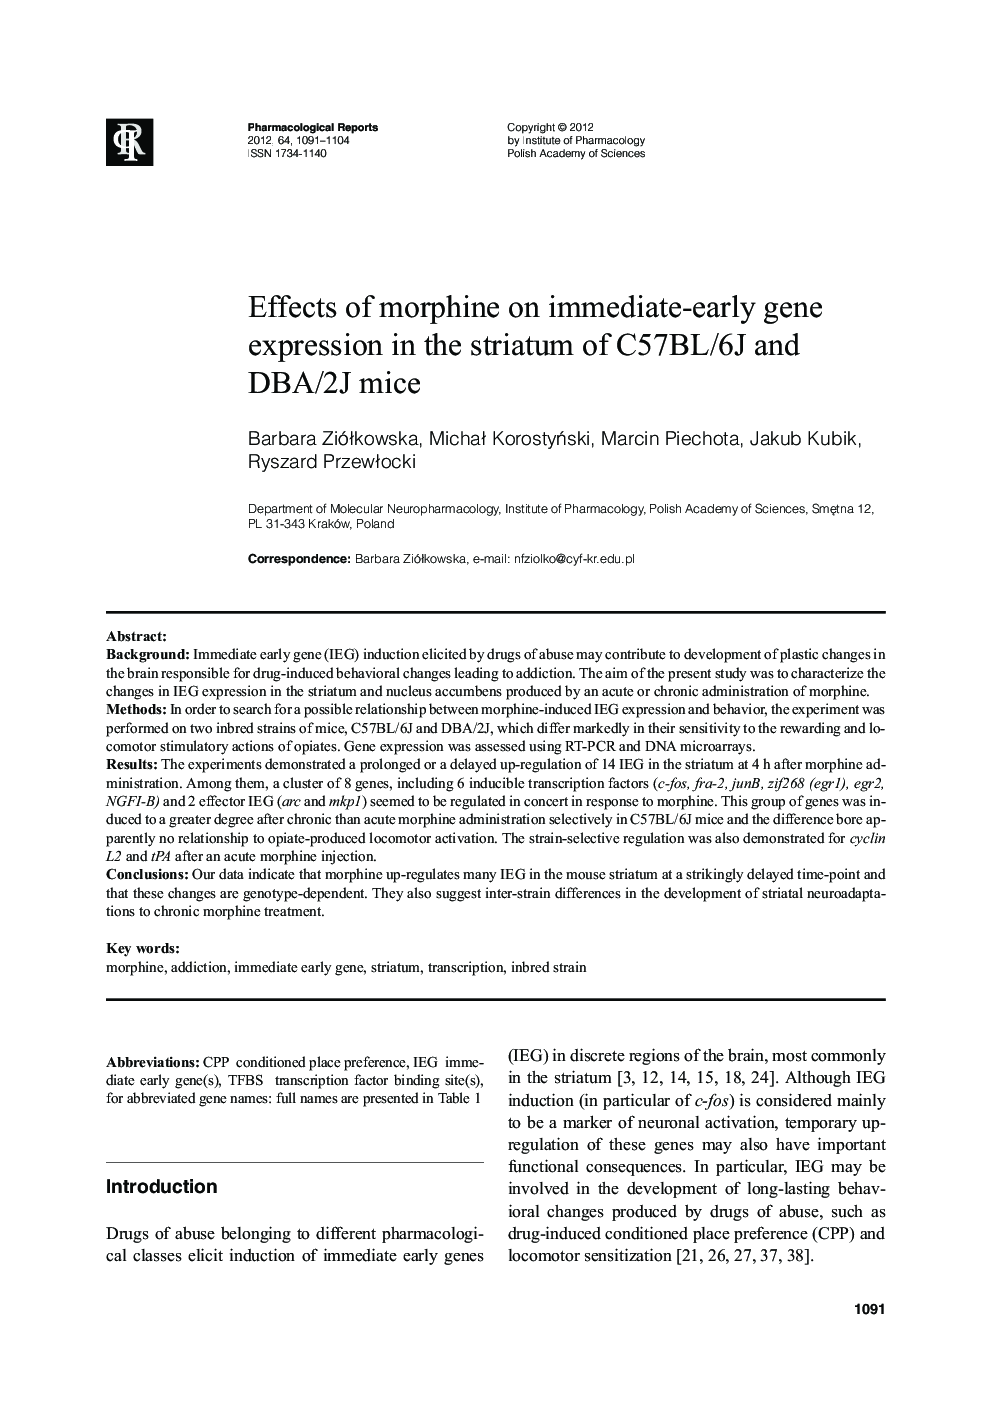 Effects of morphine on immediate-early gene expression in the striatum of C57BL/6J and DBA/2J mice